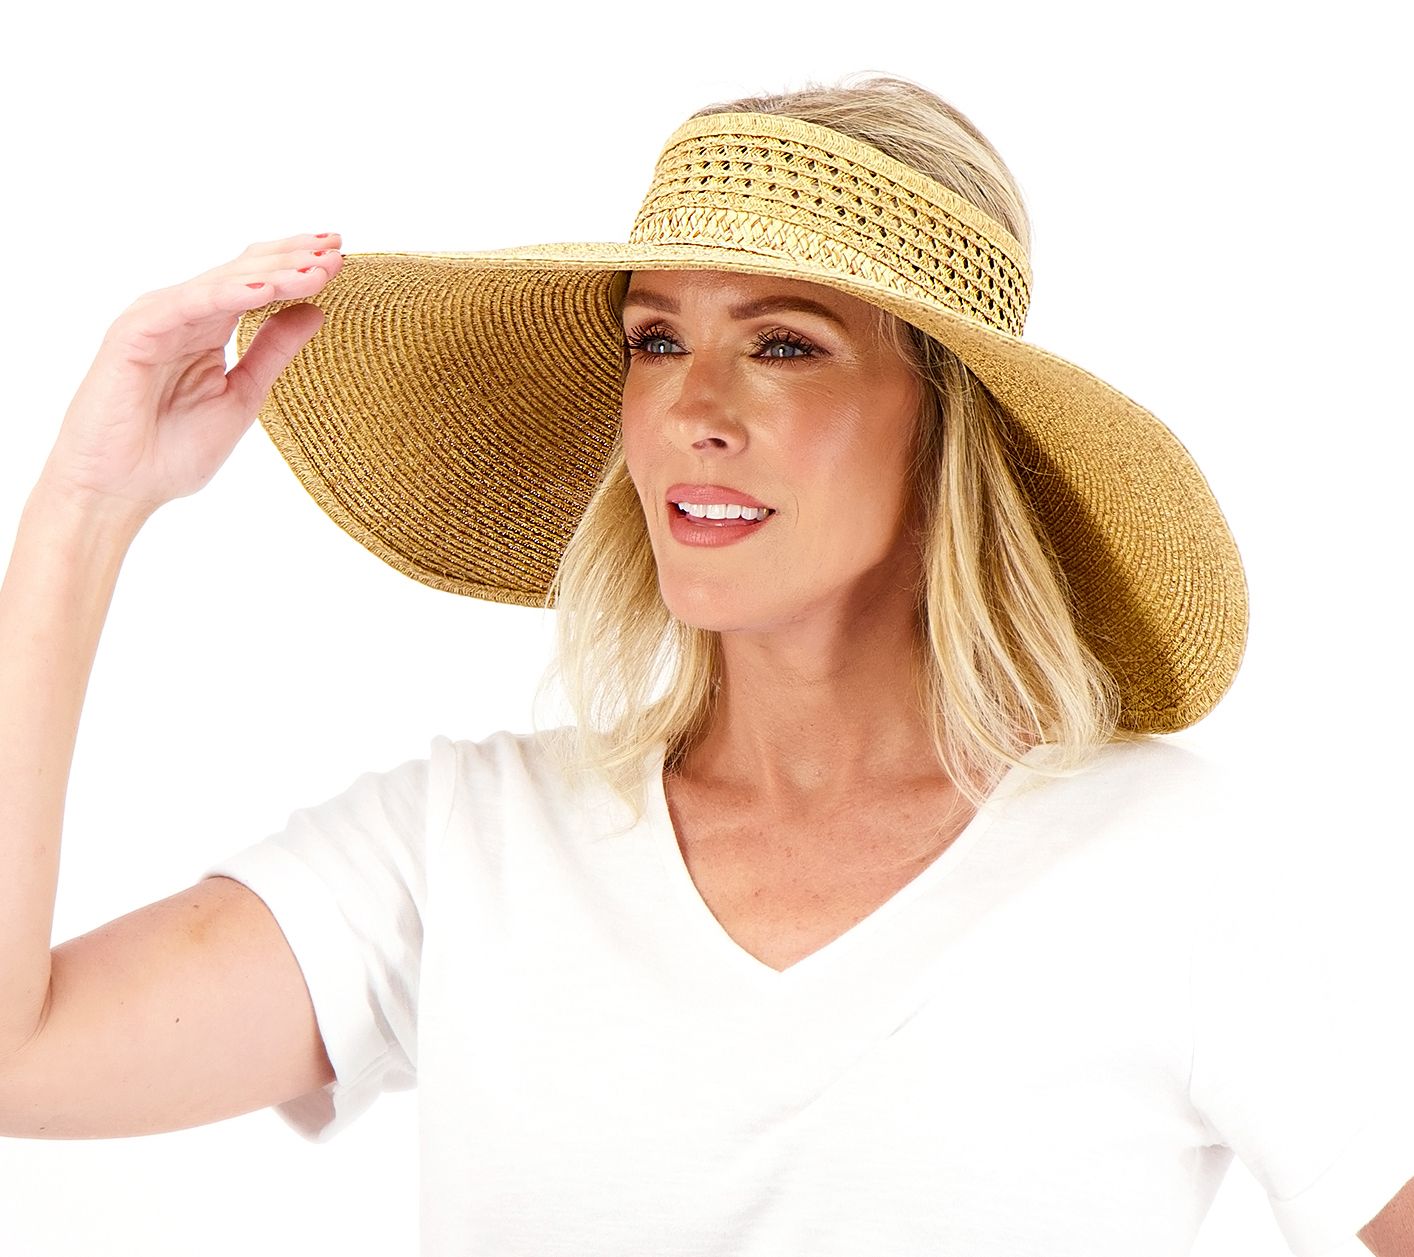 San Diego Hat Co. 6 Brim Packable Open Top Sun Hat with UPF 50 